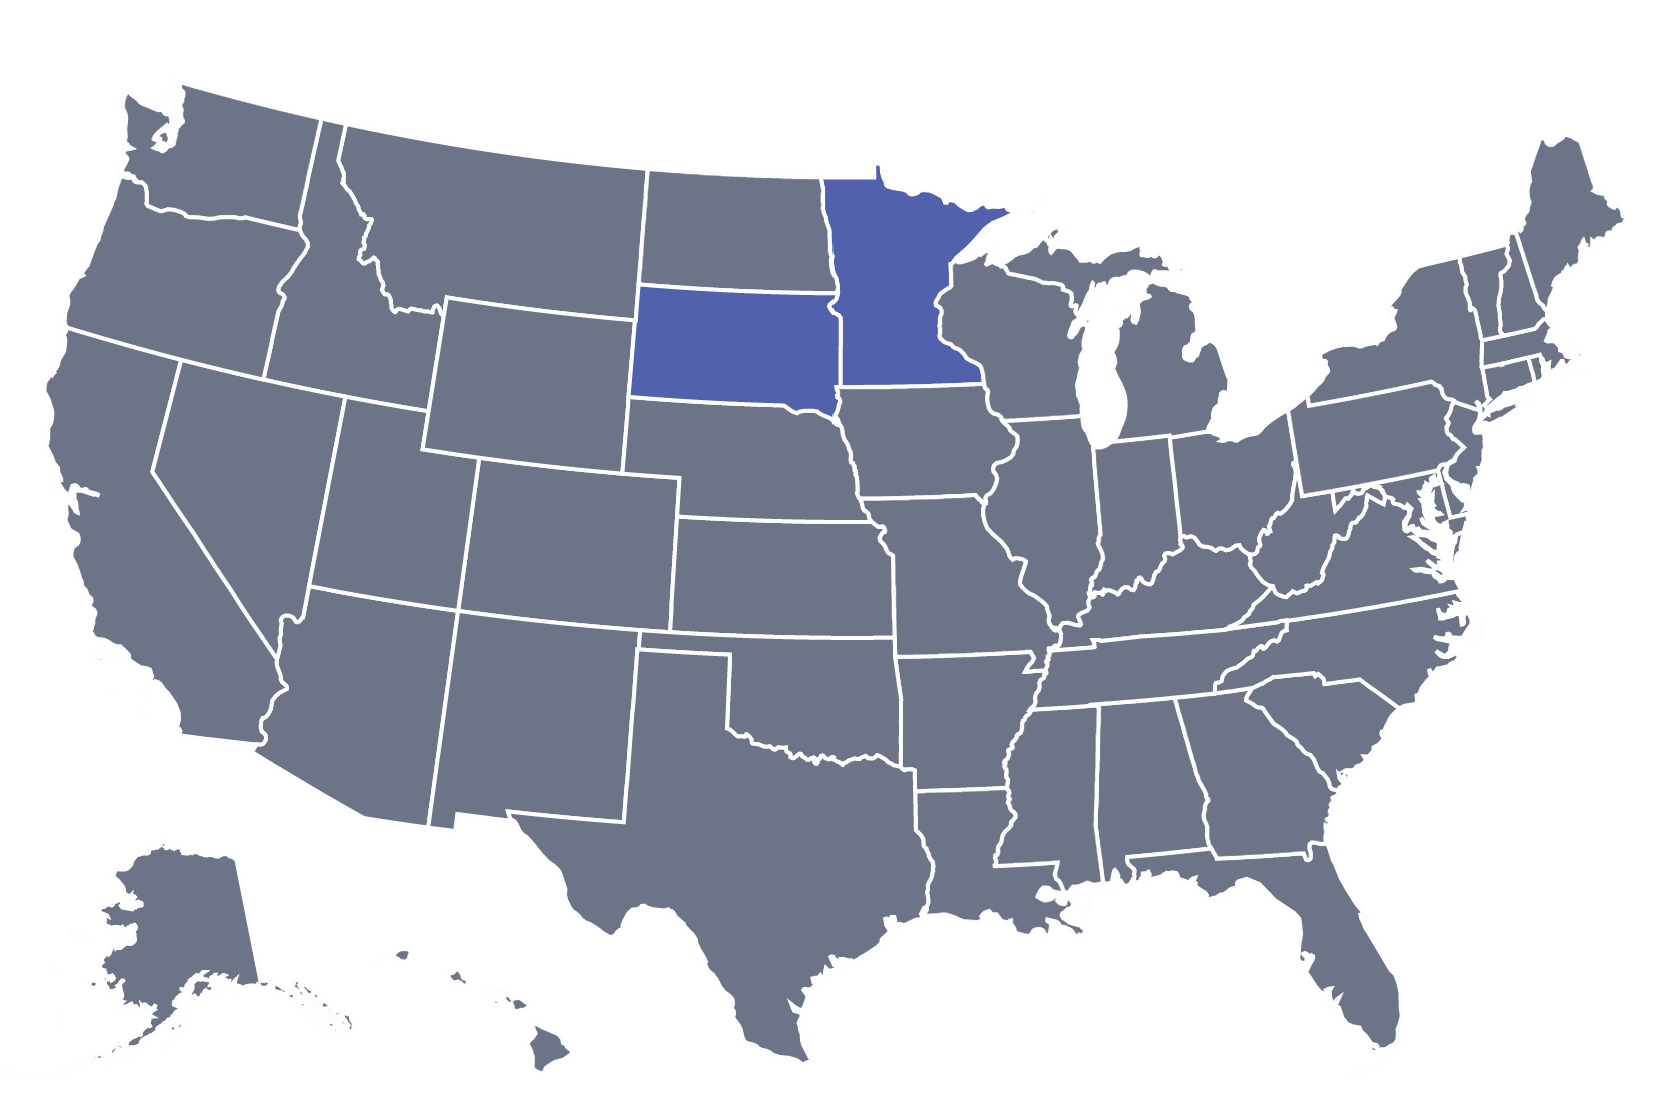 A map of the United States with South Dakota and Minnesota highlighted.